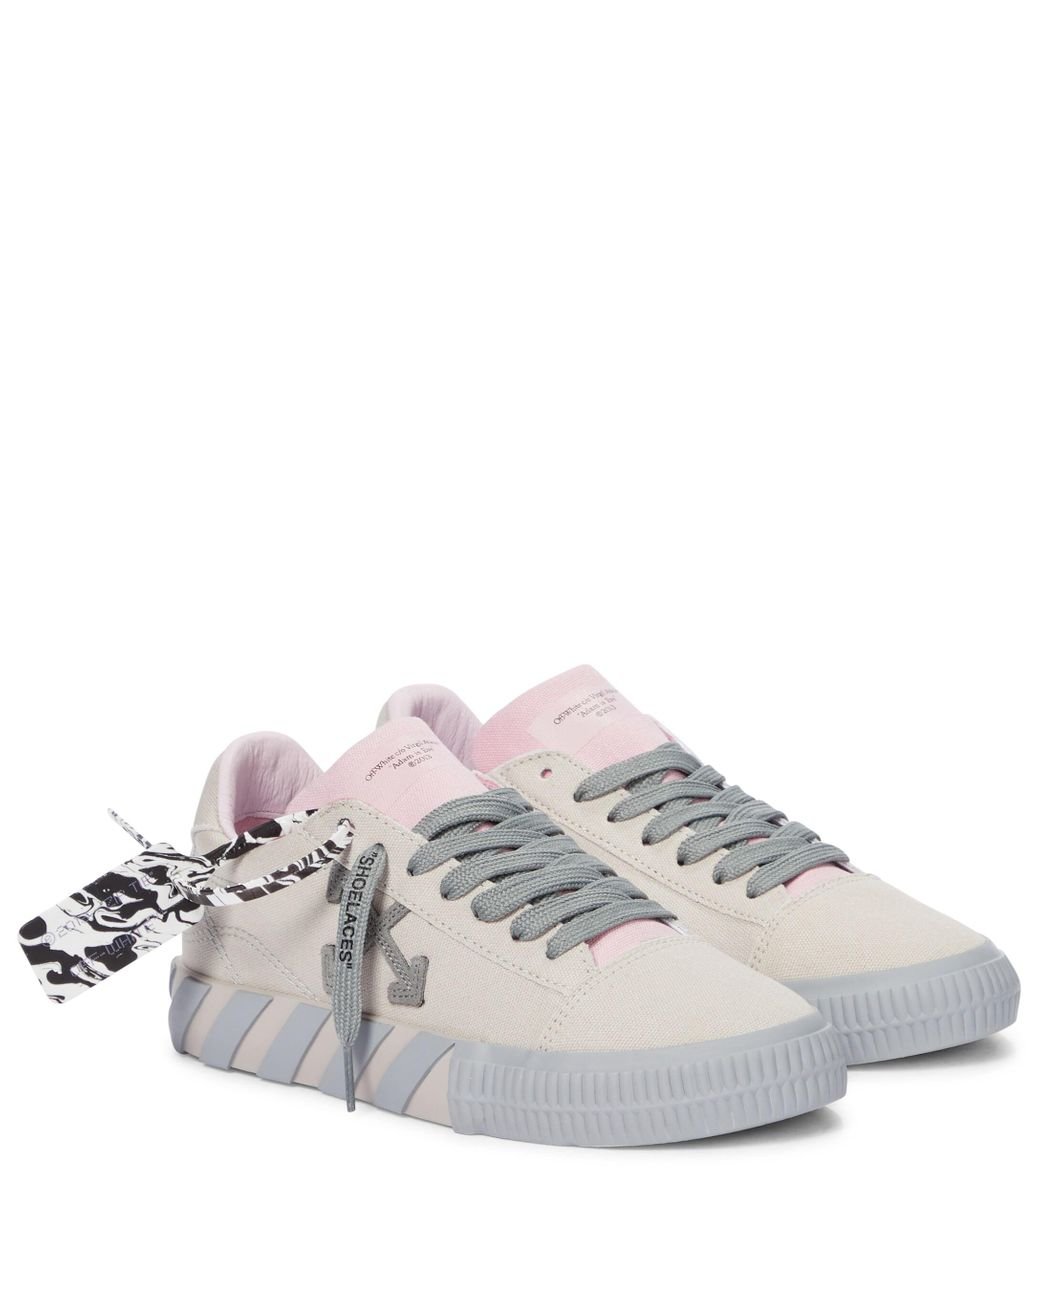 Off-White c/o Virgil Abloh Vulcanized Canvas Sneakers in Natural | Lyst